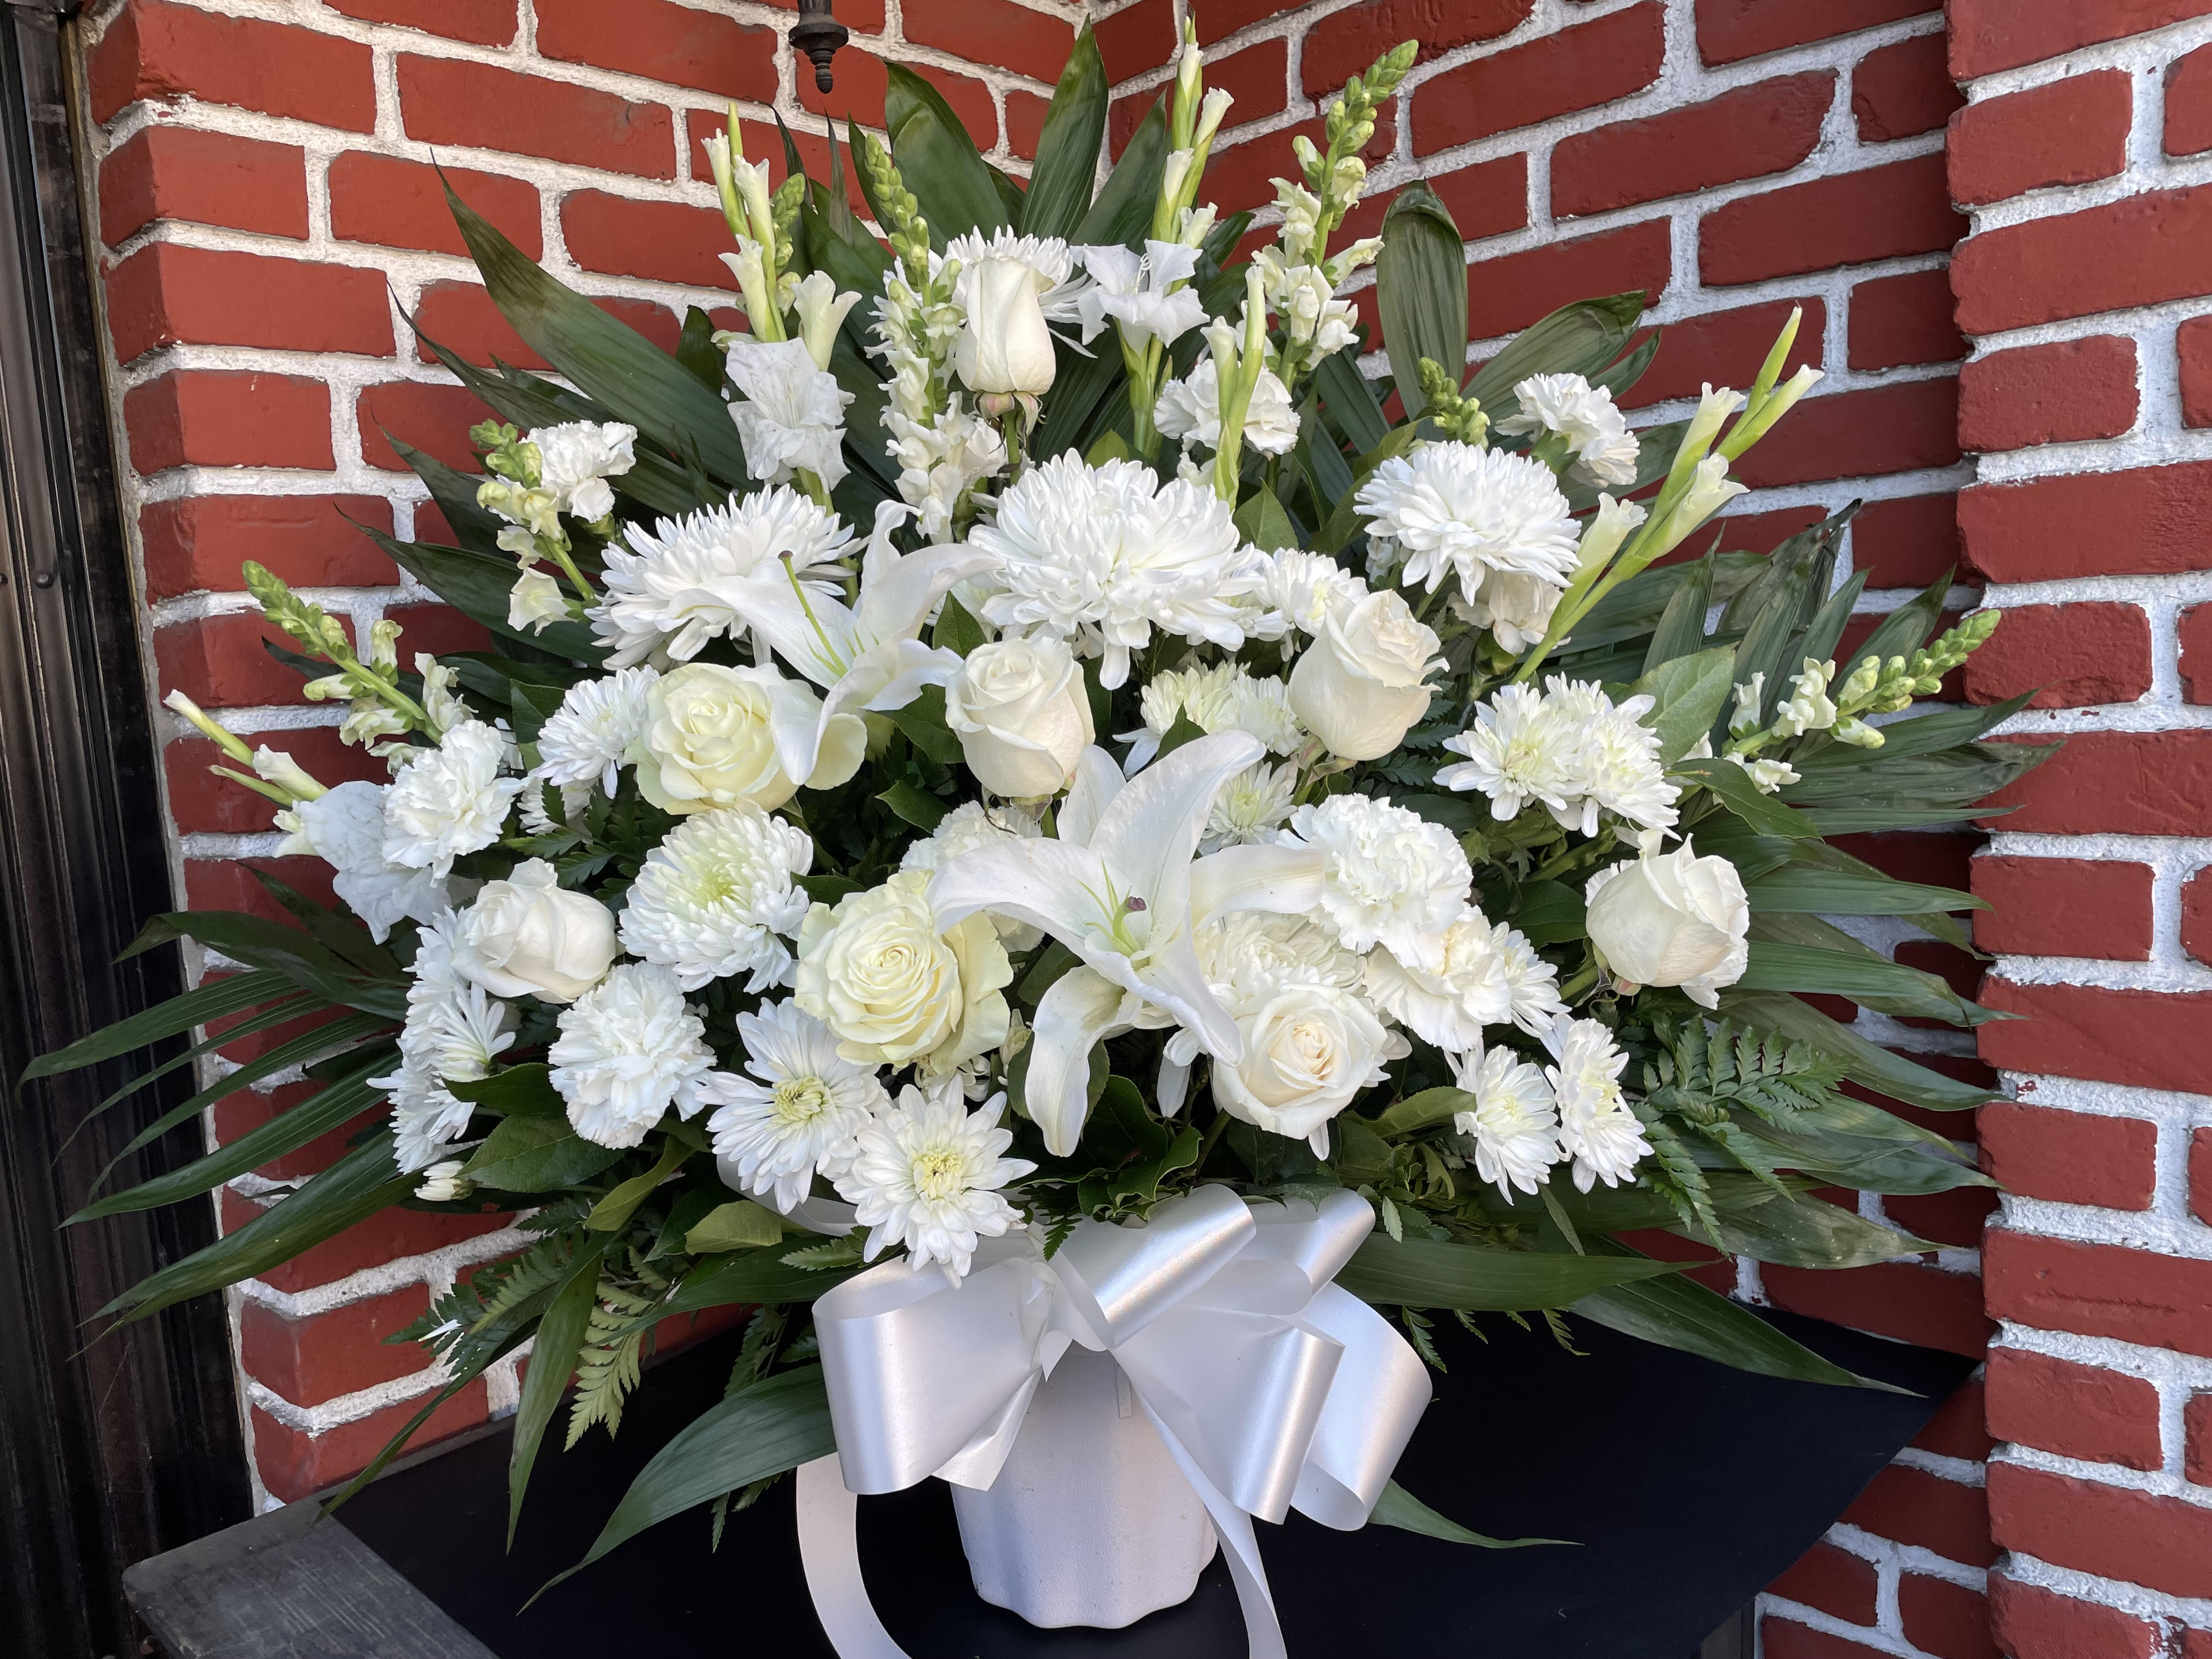 Rose and Lily White funeral basket  - An all-white funeral basket featuring  lilies, roses, dragon snaps, and more framed by a backdrop of large leaves. Suitable for any type of funeral ceremony